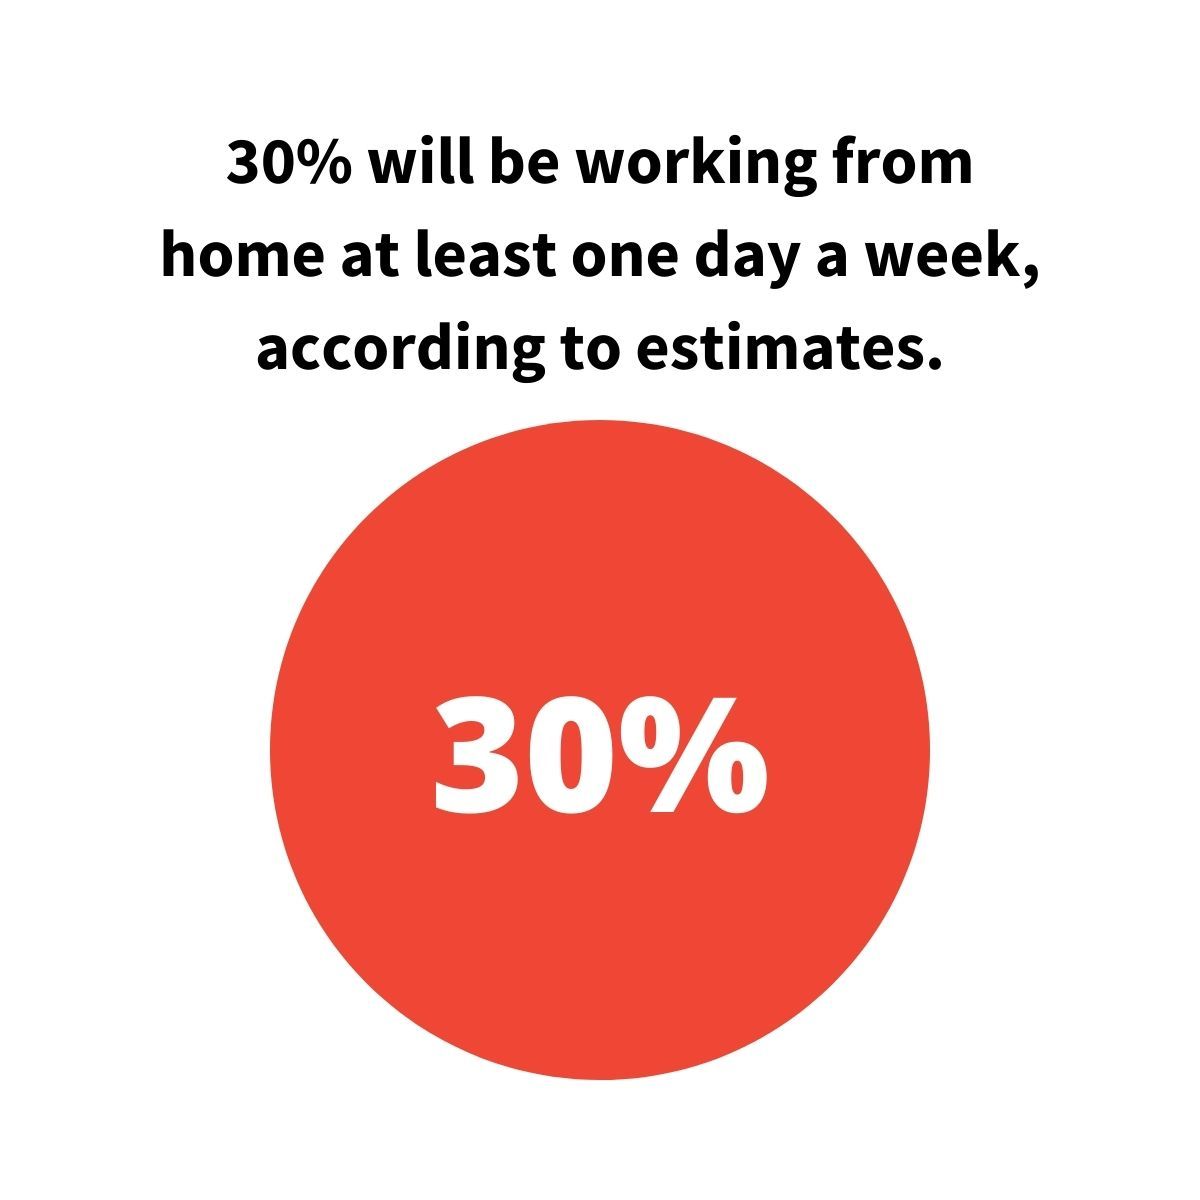 30 percent will work from home at least one day a week